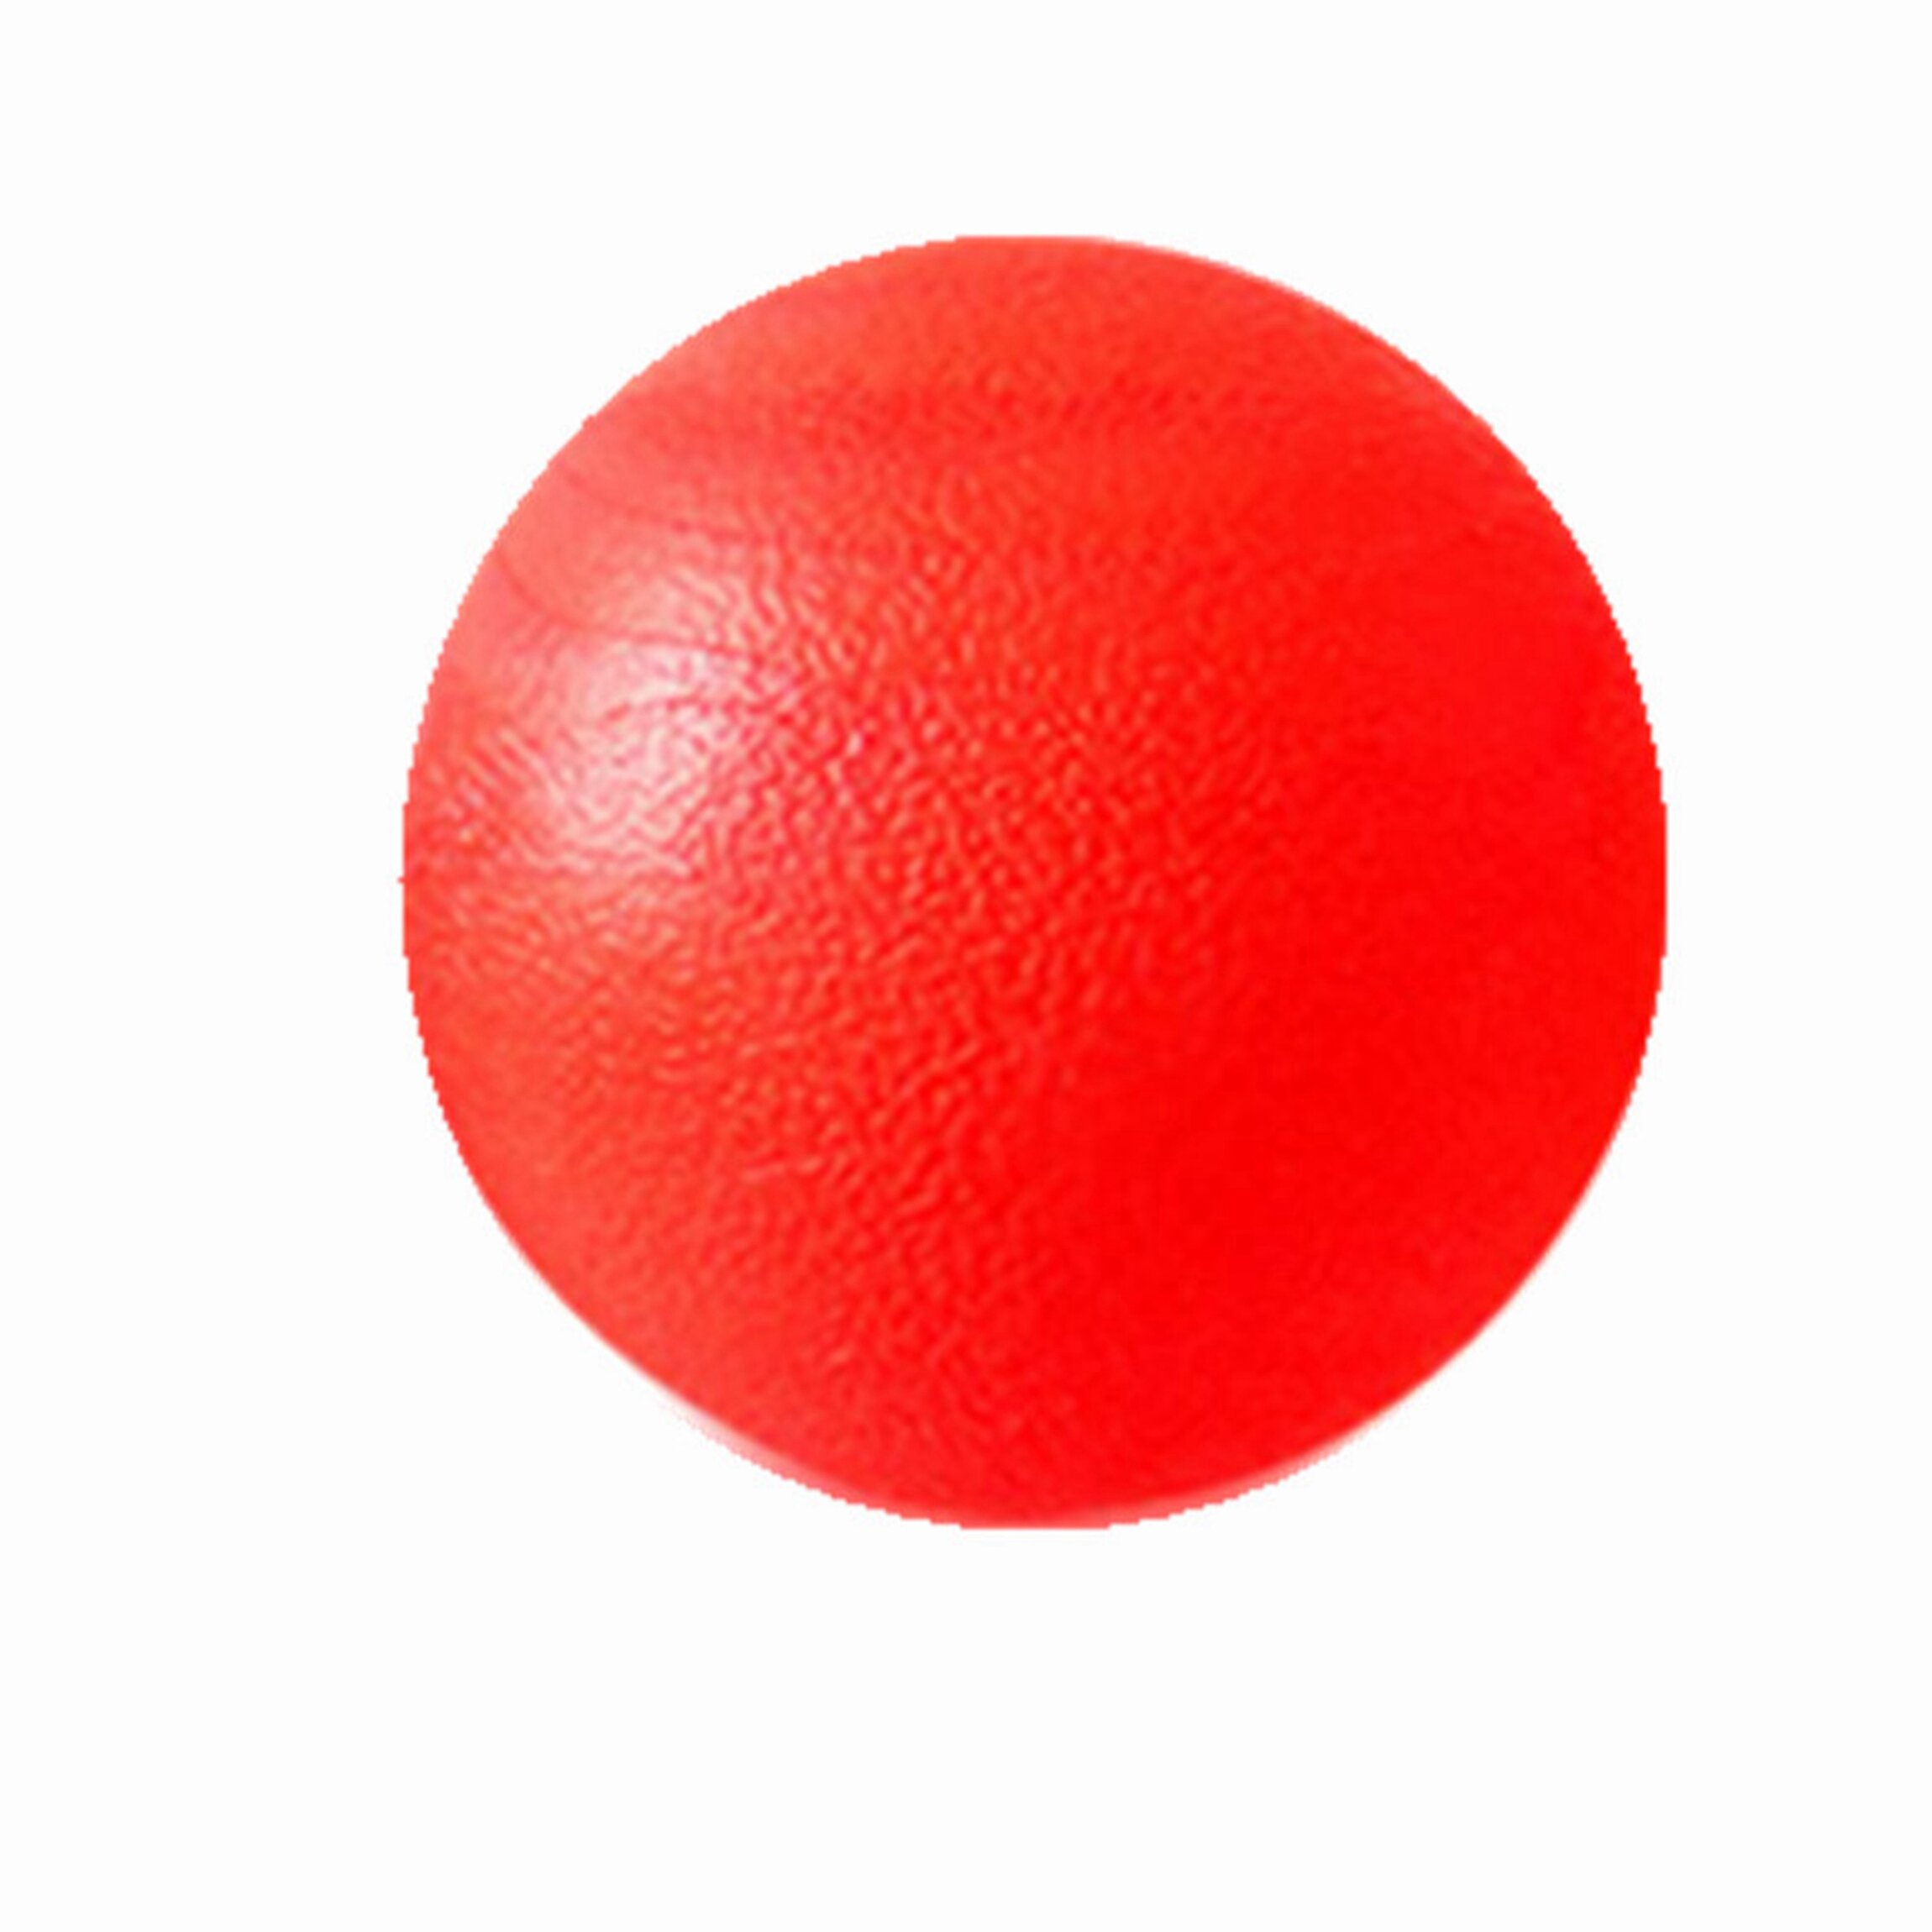 Fixturedisplays® 2.76 Red Rubber Bouncy Dog Ball, Non-Toxic Solid